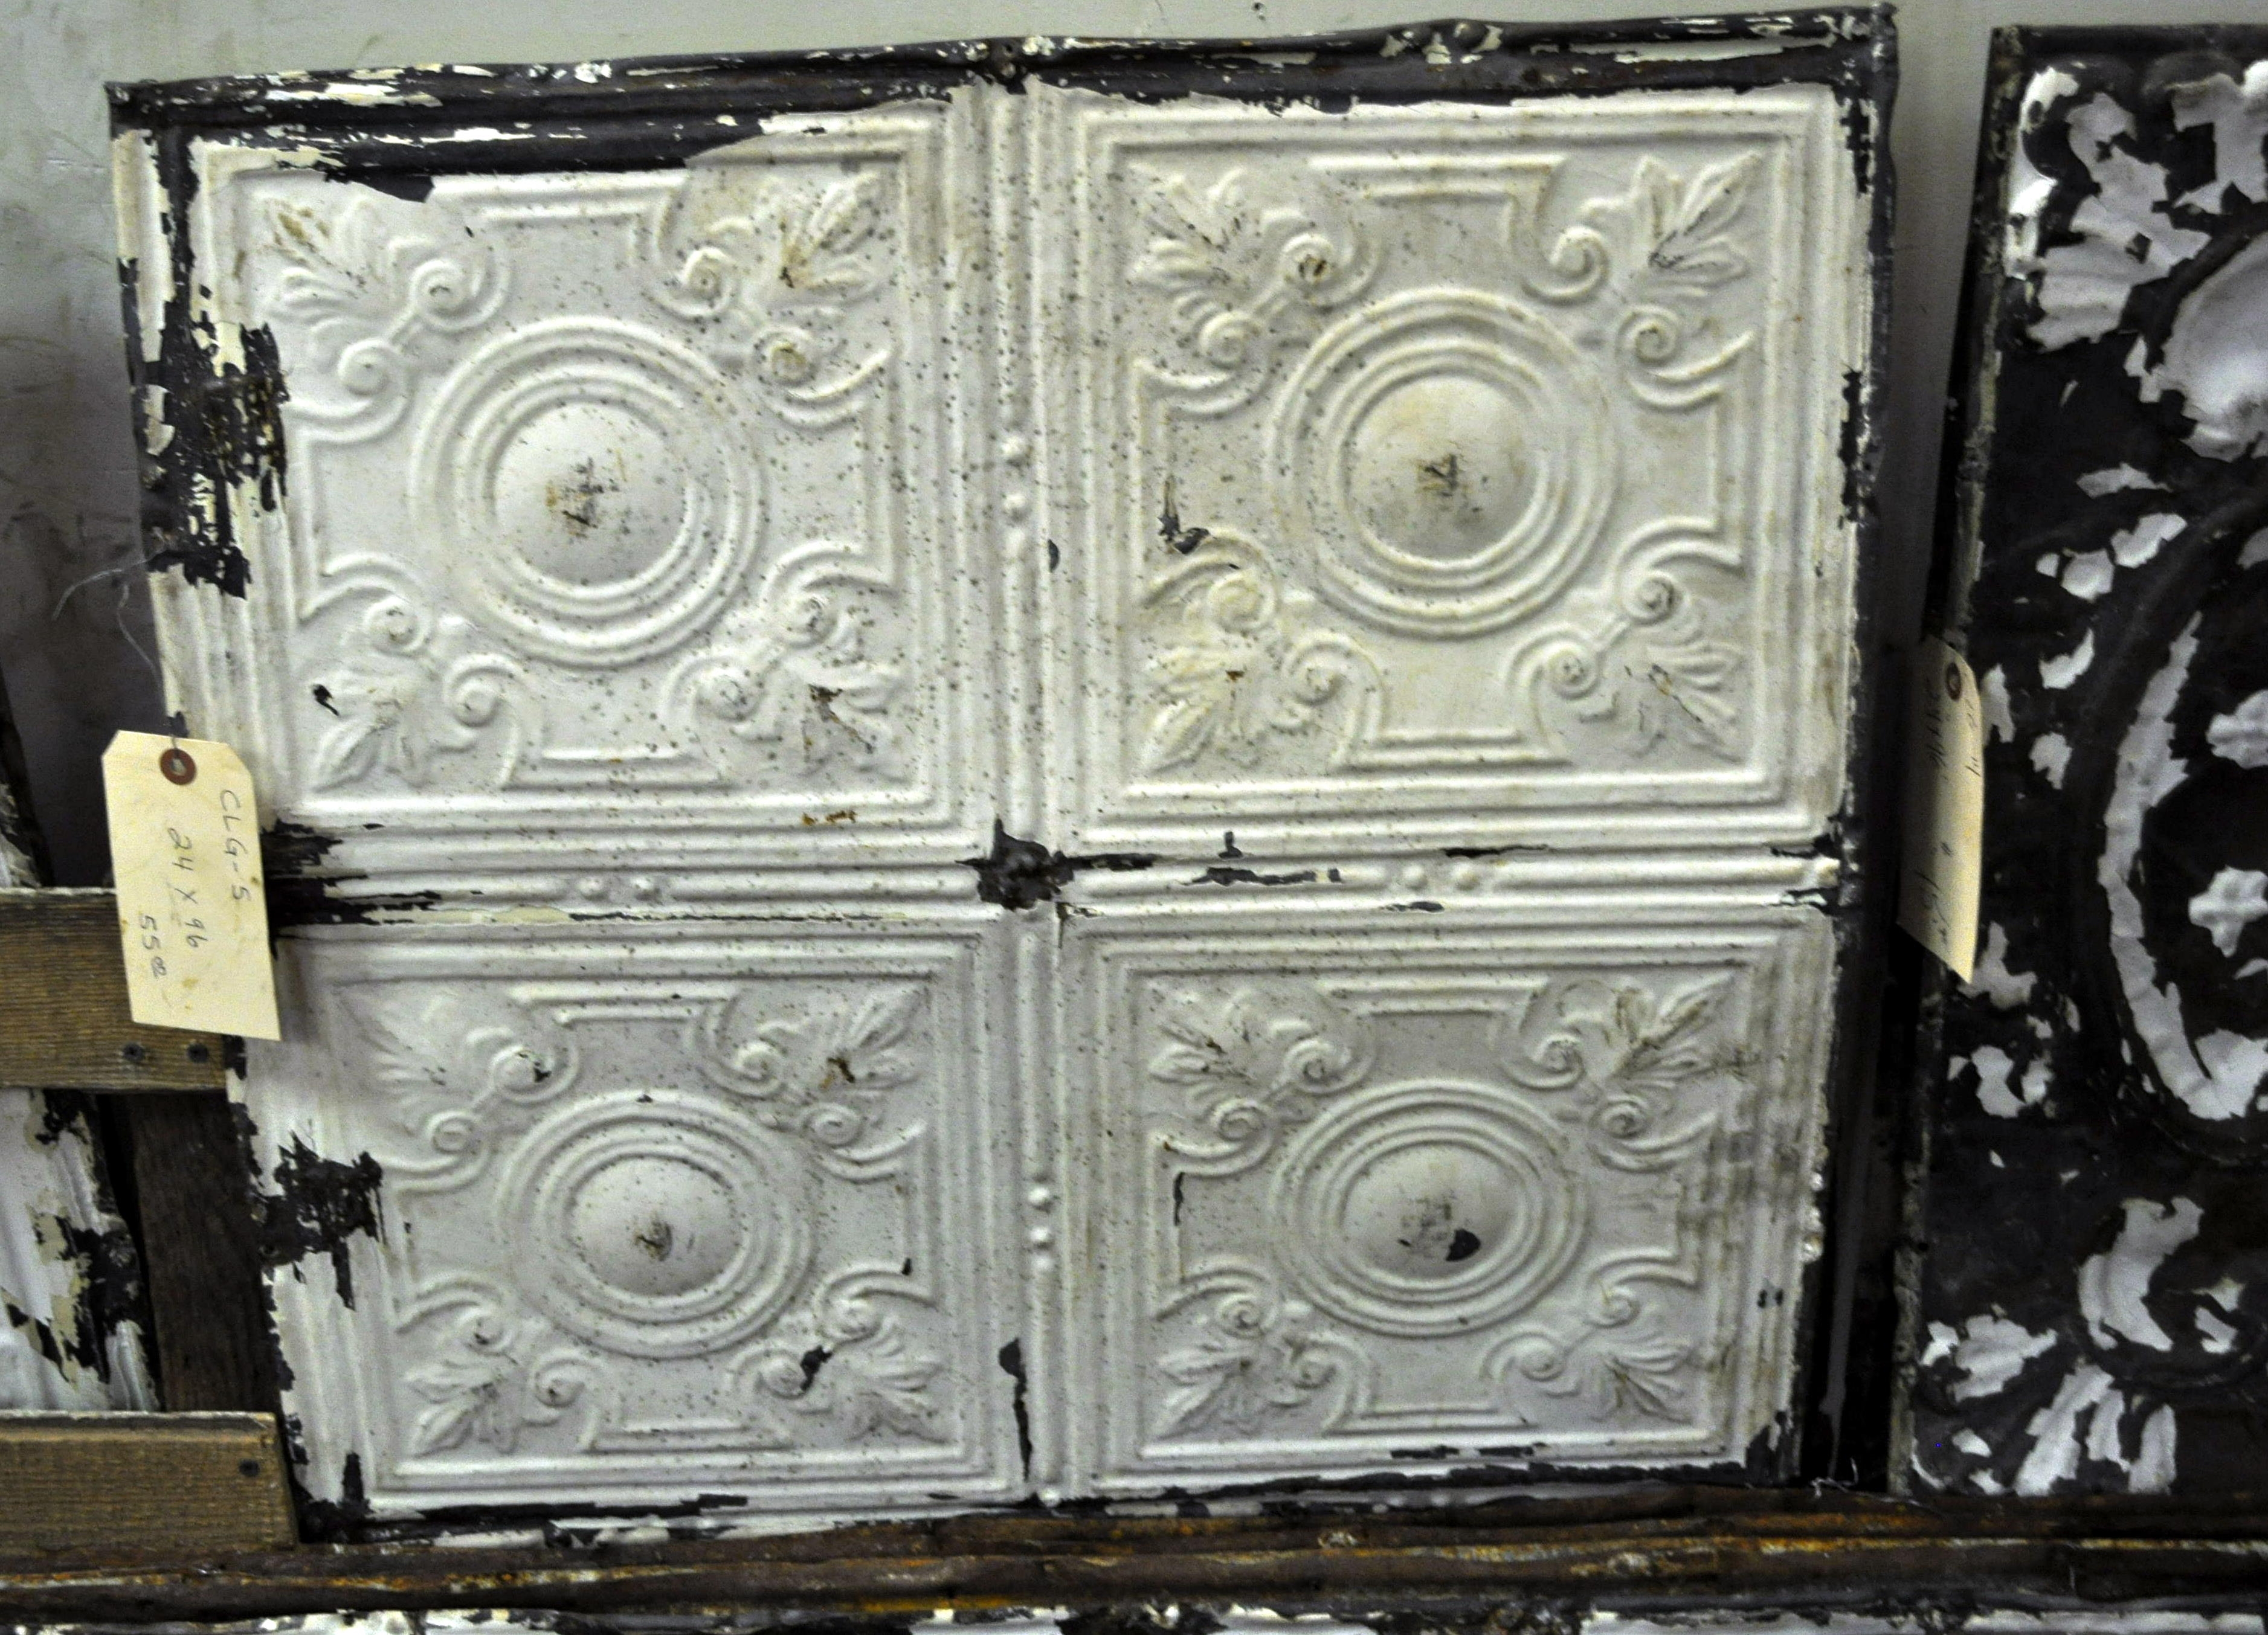 Salvaged Pressed Tin Ceiling Tiles Salvaged Pressed Tin Ceiling Tiles innovative antique metal ceiling tiles 64 vintage tin ceiling 3754 X 2707